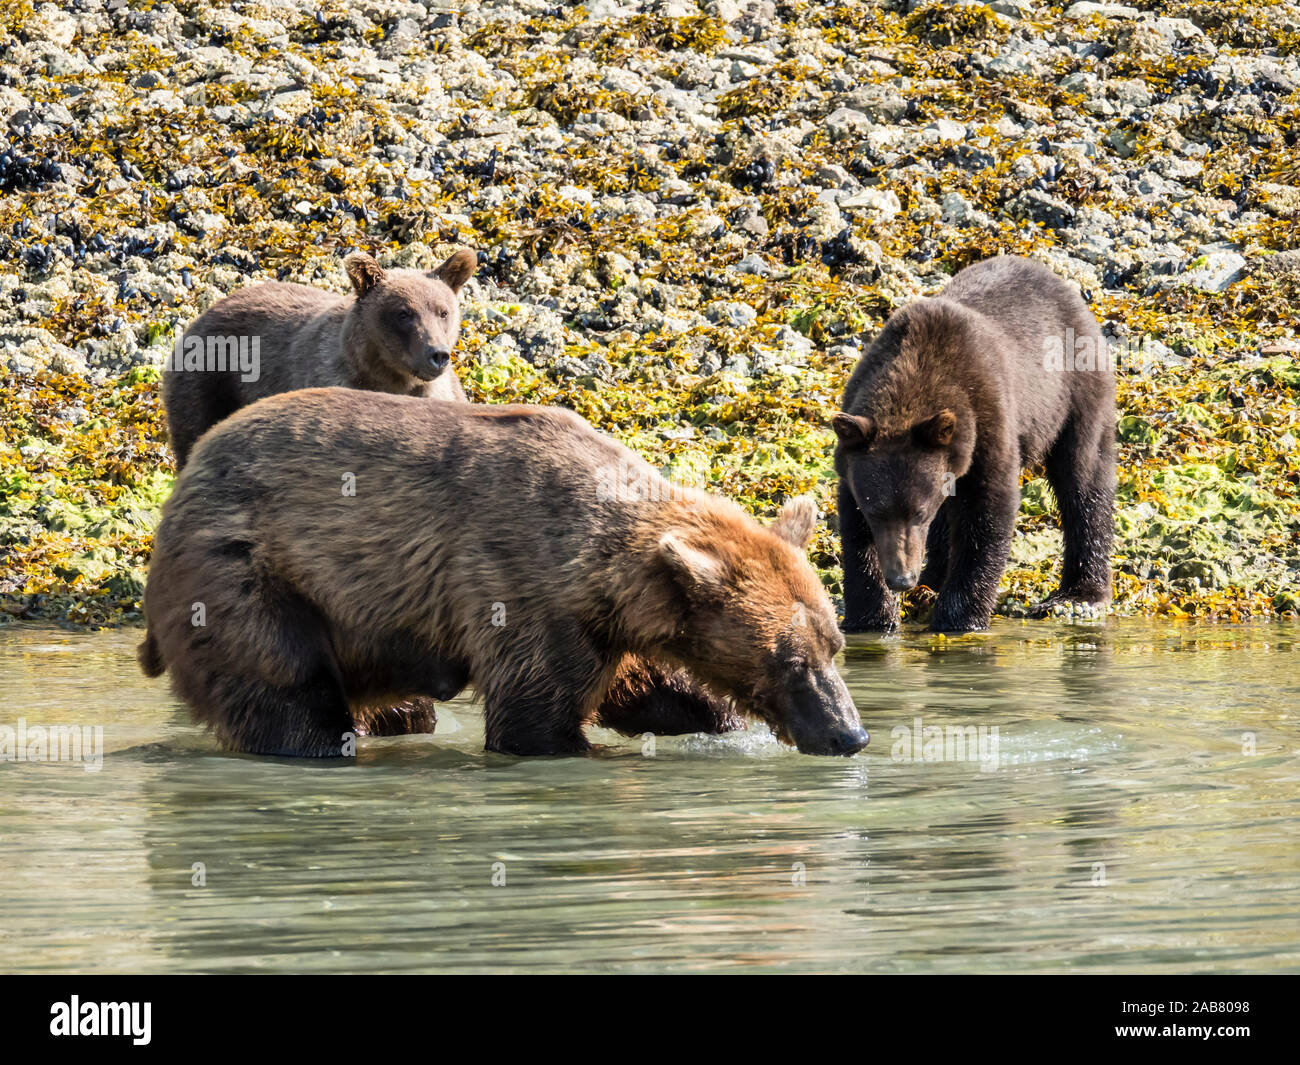 A mother brown bear (Ursus arctos), feeding with her cubs in Geographic Harbor, Katmai National Park, Alaska, North America Stock Photo